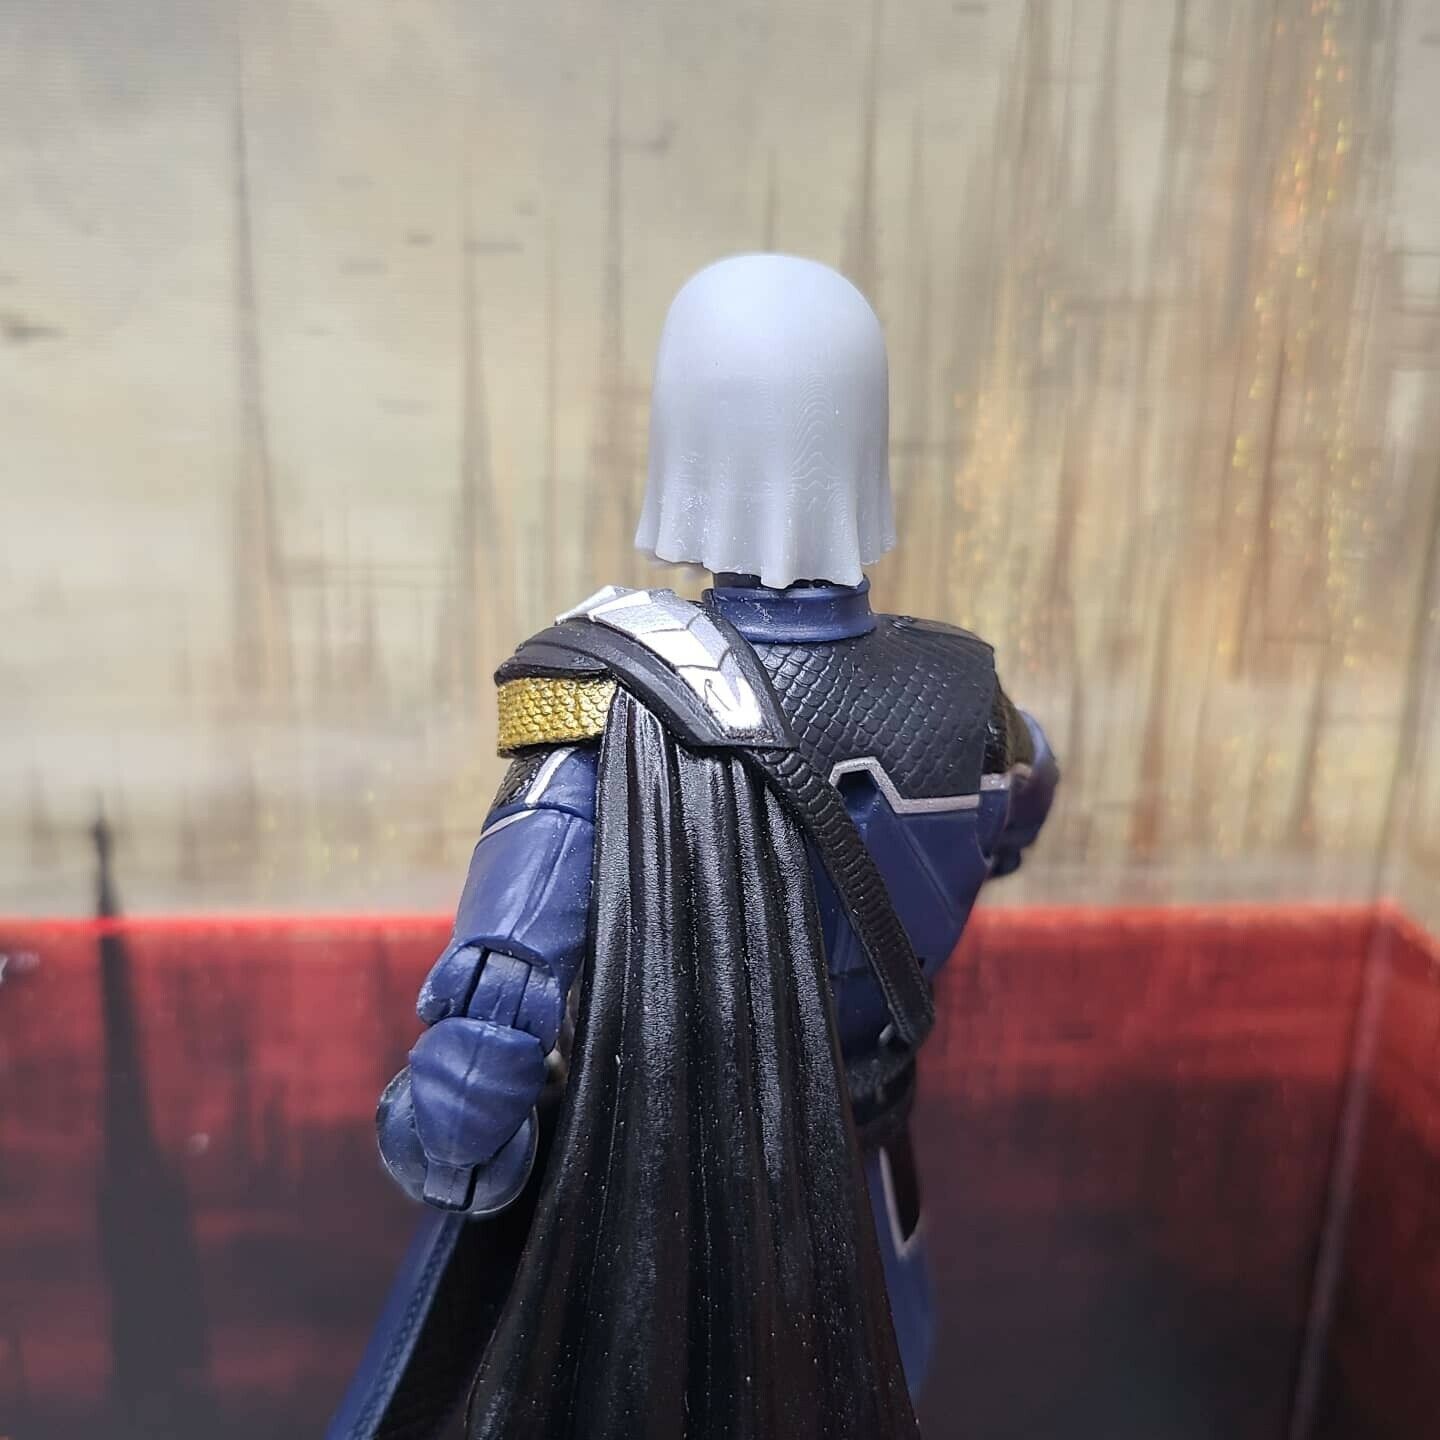 Back of the G. I. Joe Classified Series Cobra Commander Action Figure 06 Collectible Premium Toy with a Fantasy World Games Custom Head Sculpt